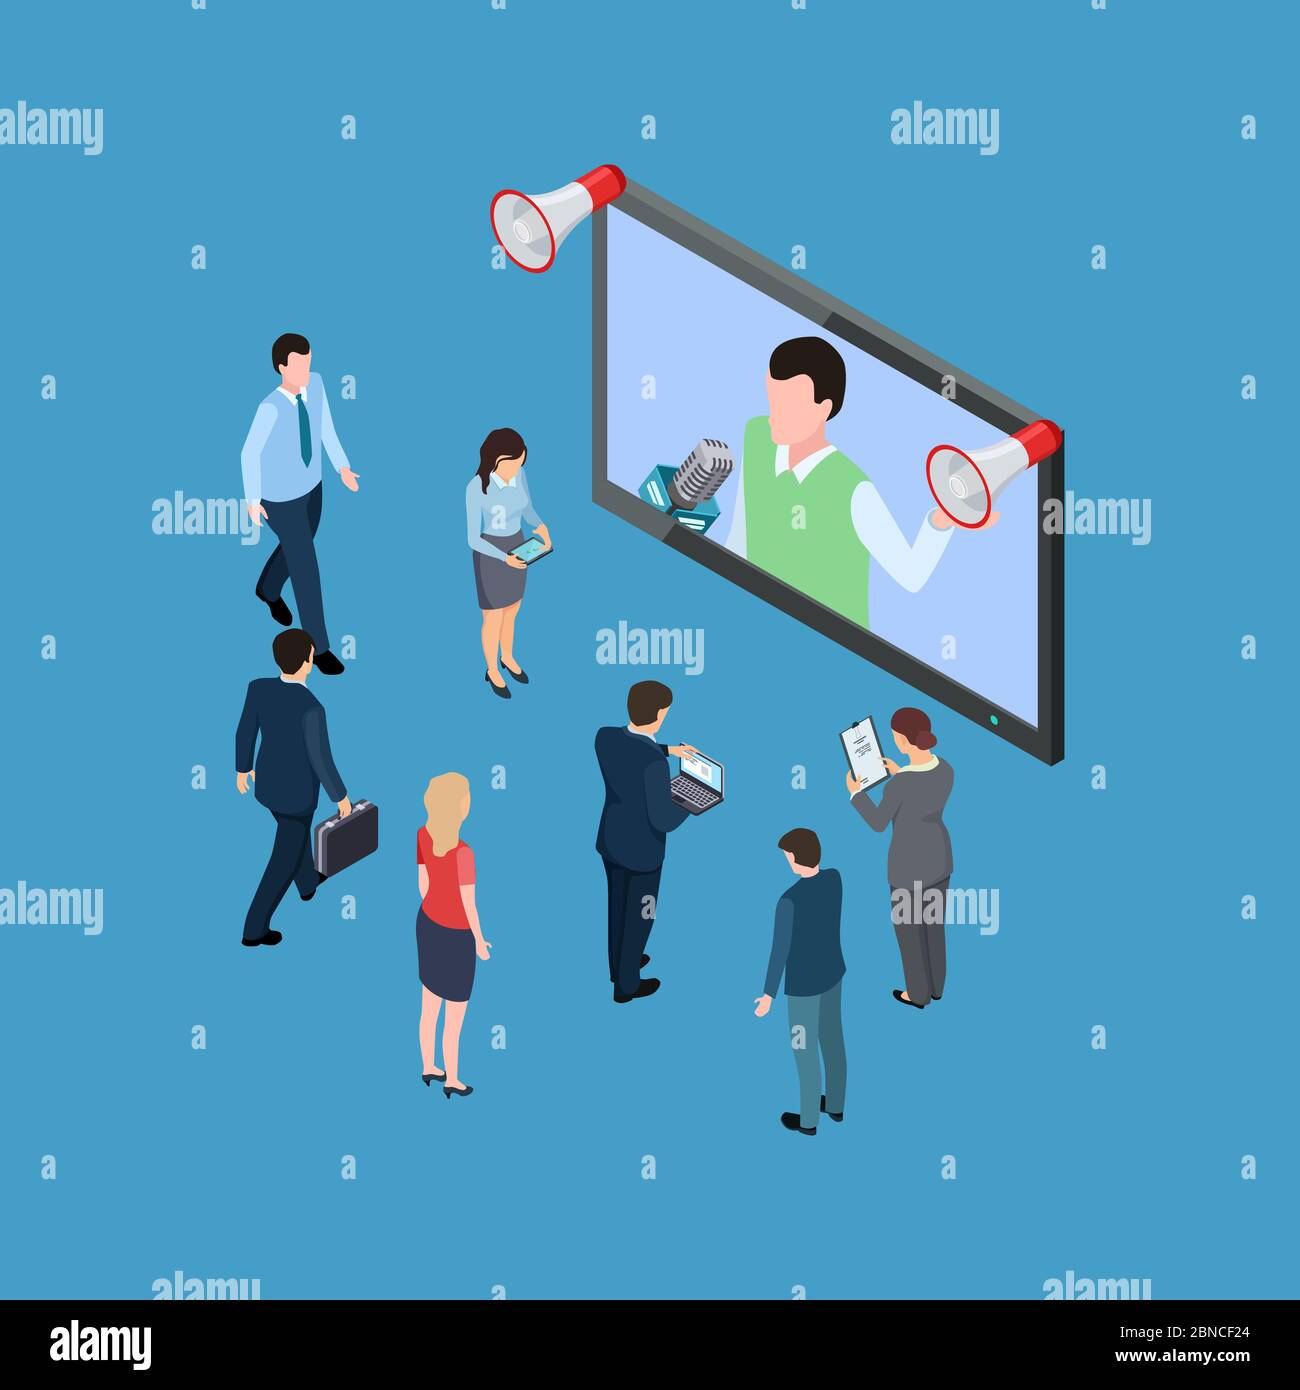 Business people with megaphones and TV show isometric vector illustration. Megaphone communication screen with advertisement Stock Vector